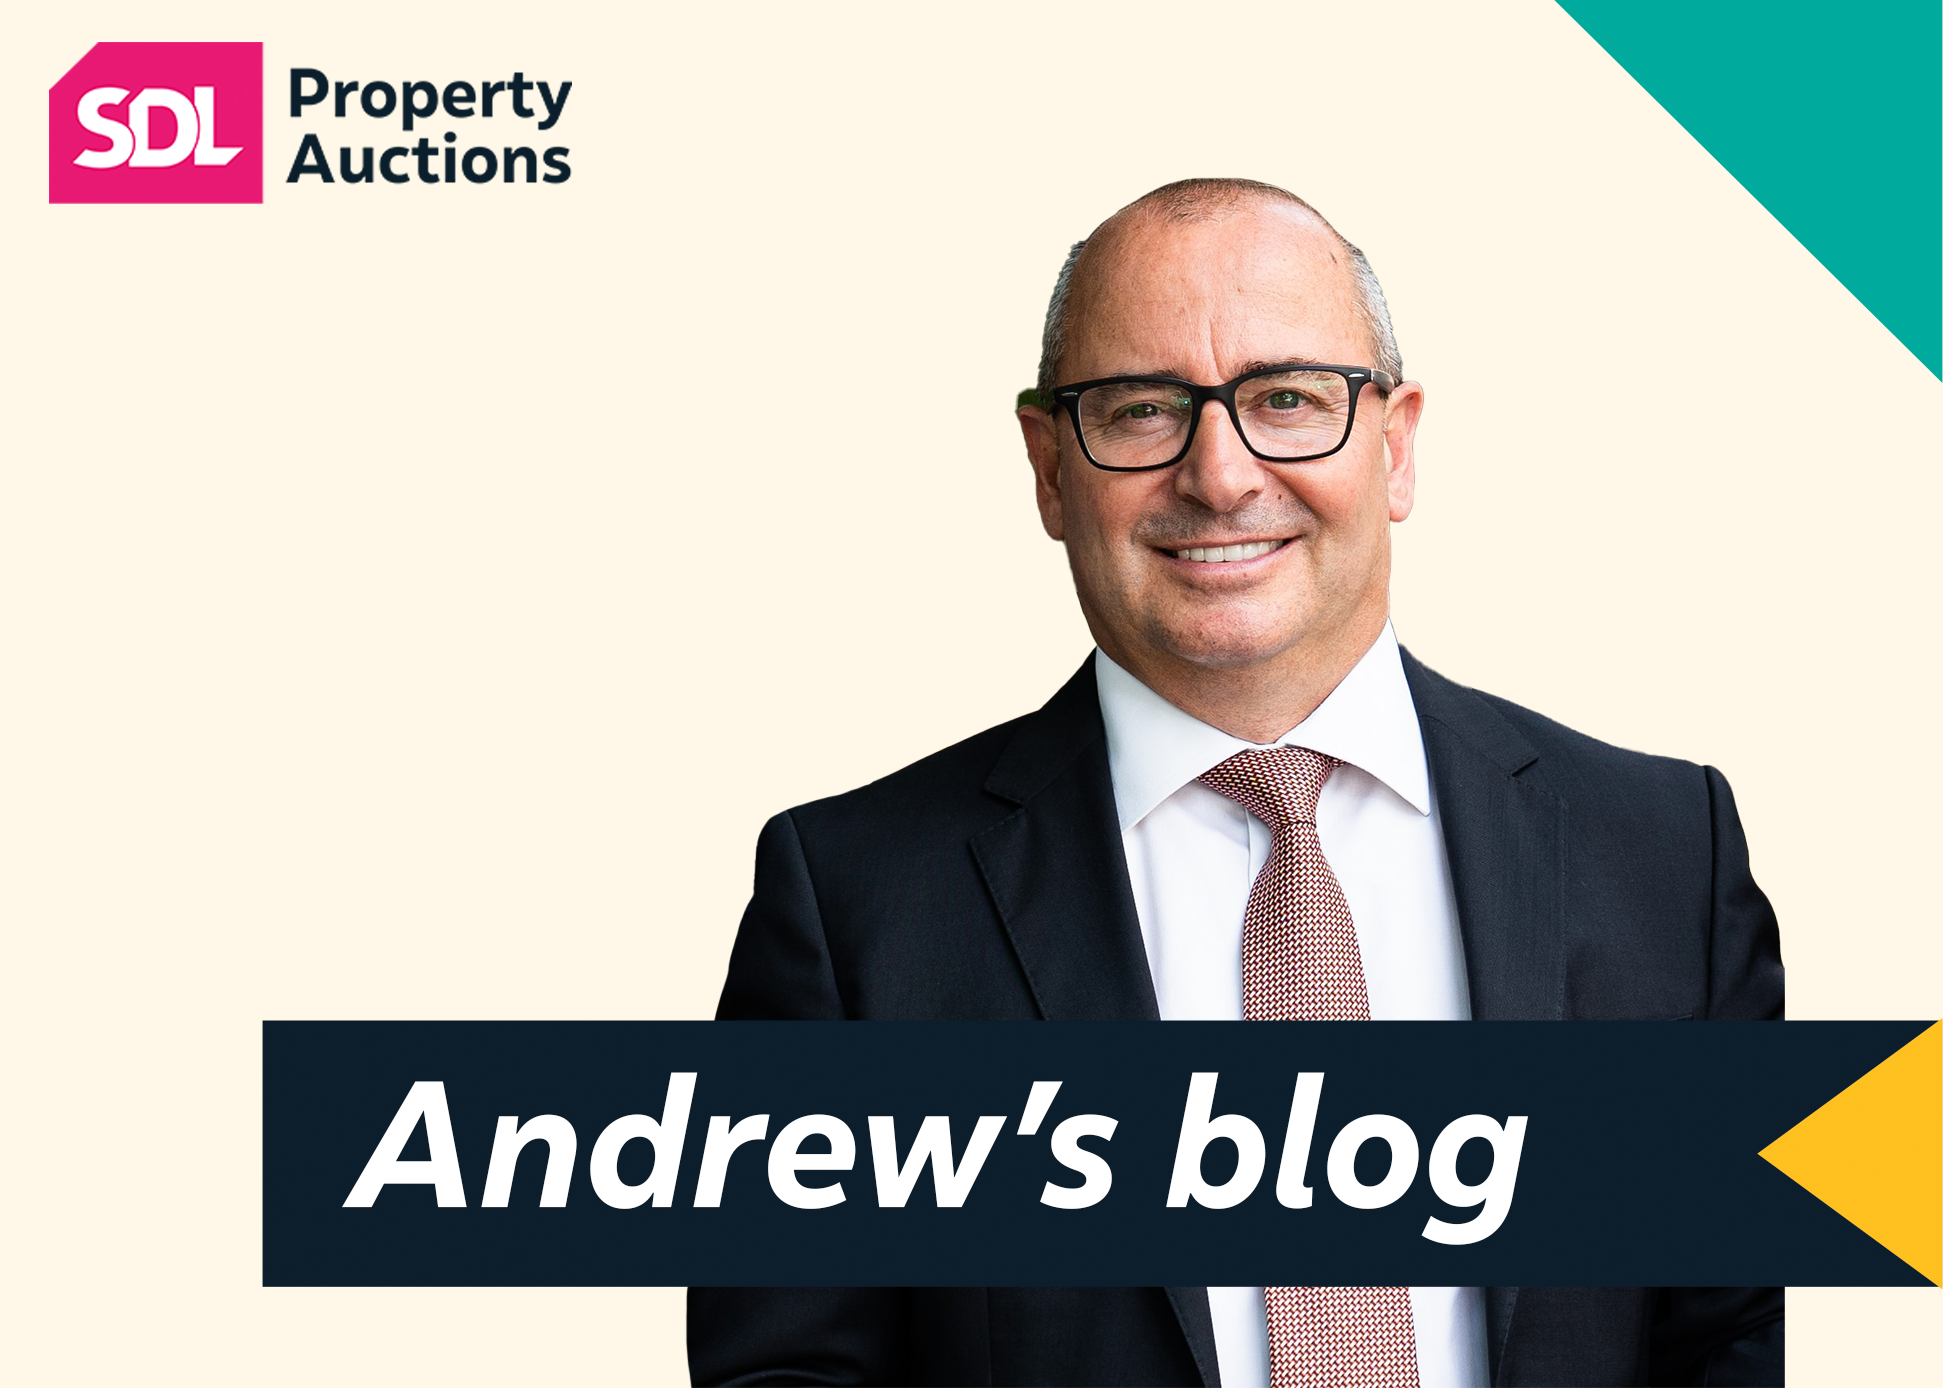 How SDL Property Auctions is leading a property market revolution to normalise auctions